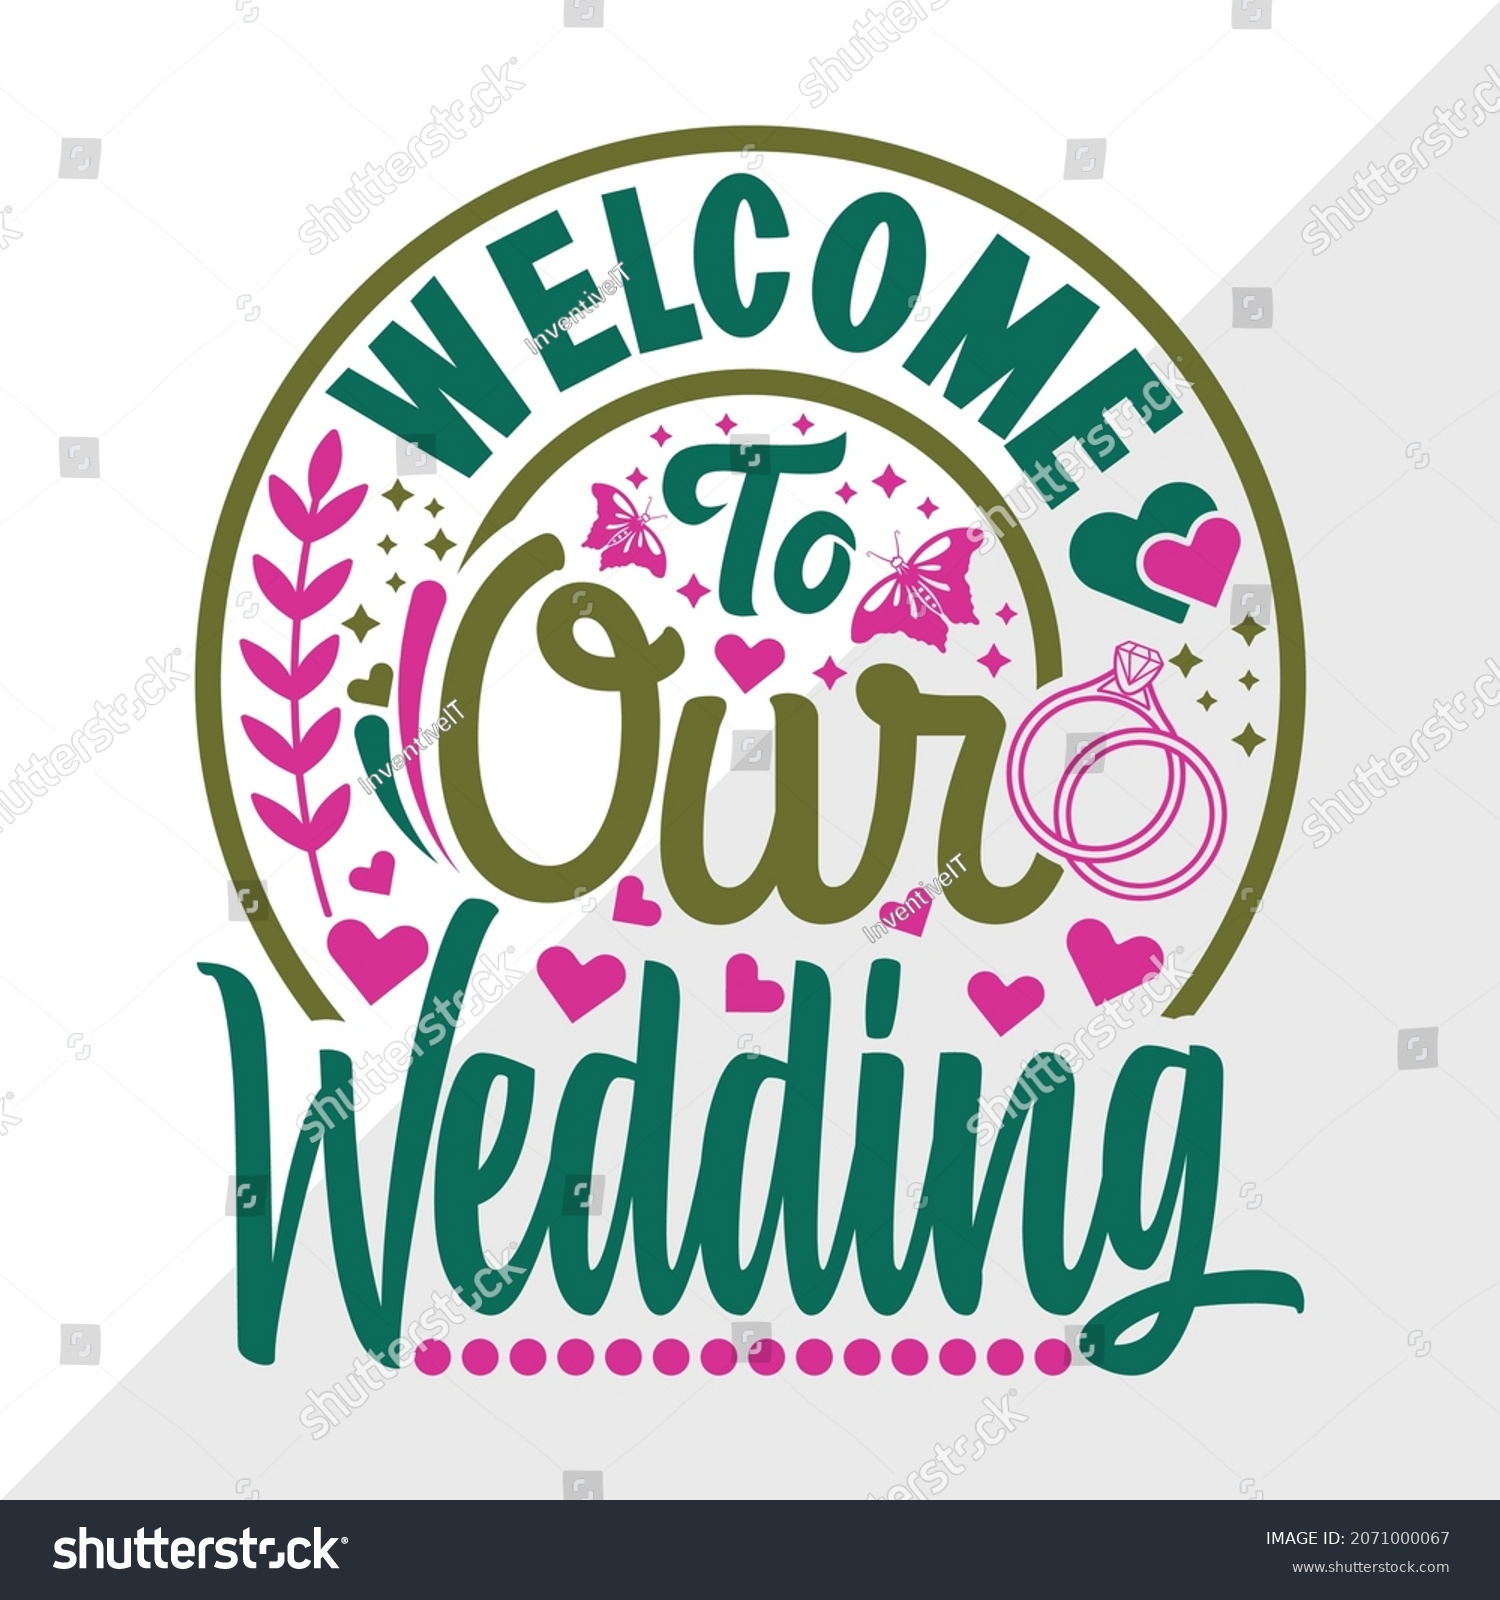 SVG of Welcome To Our Wedding Printable Vector Illustration svg